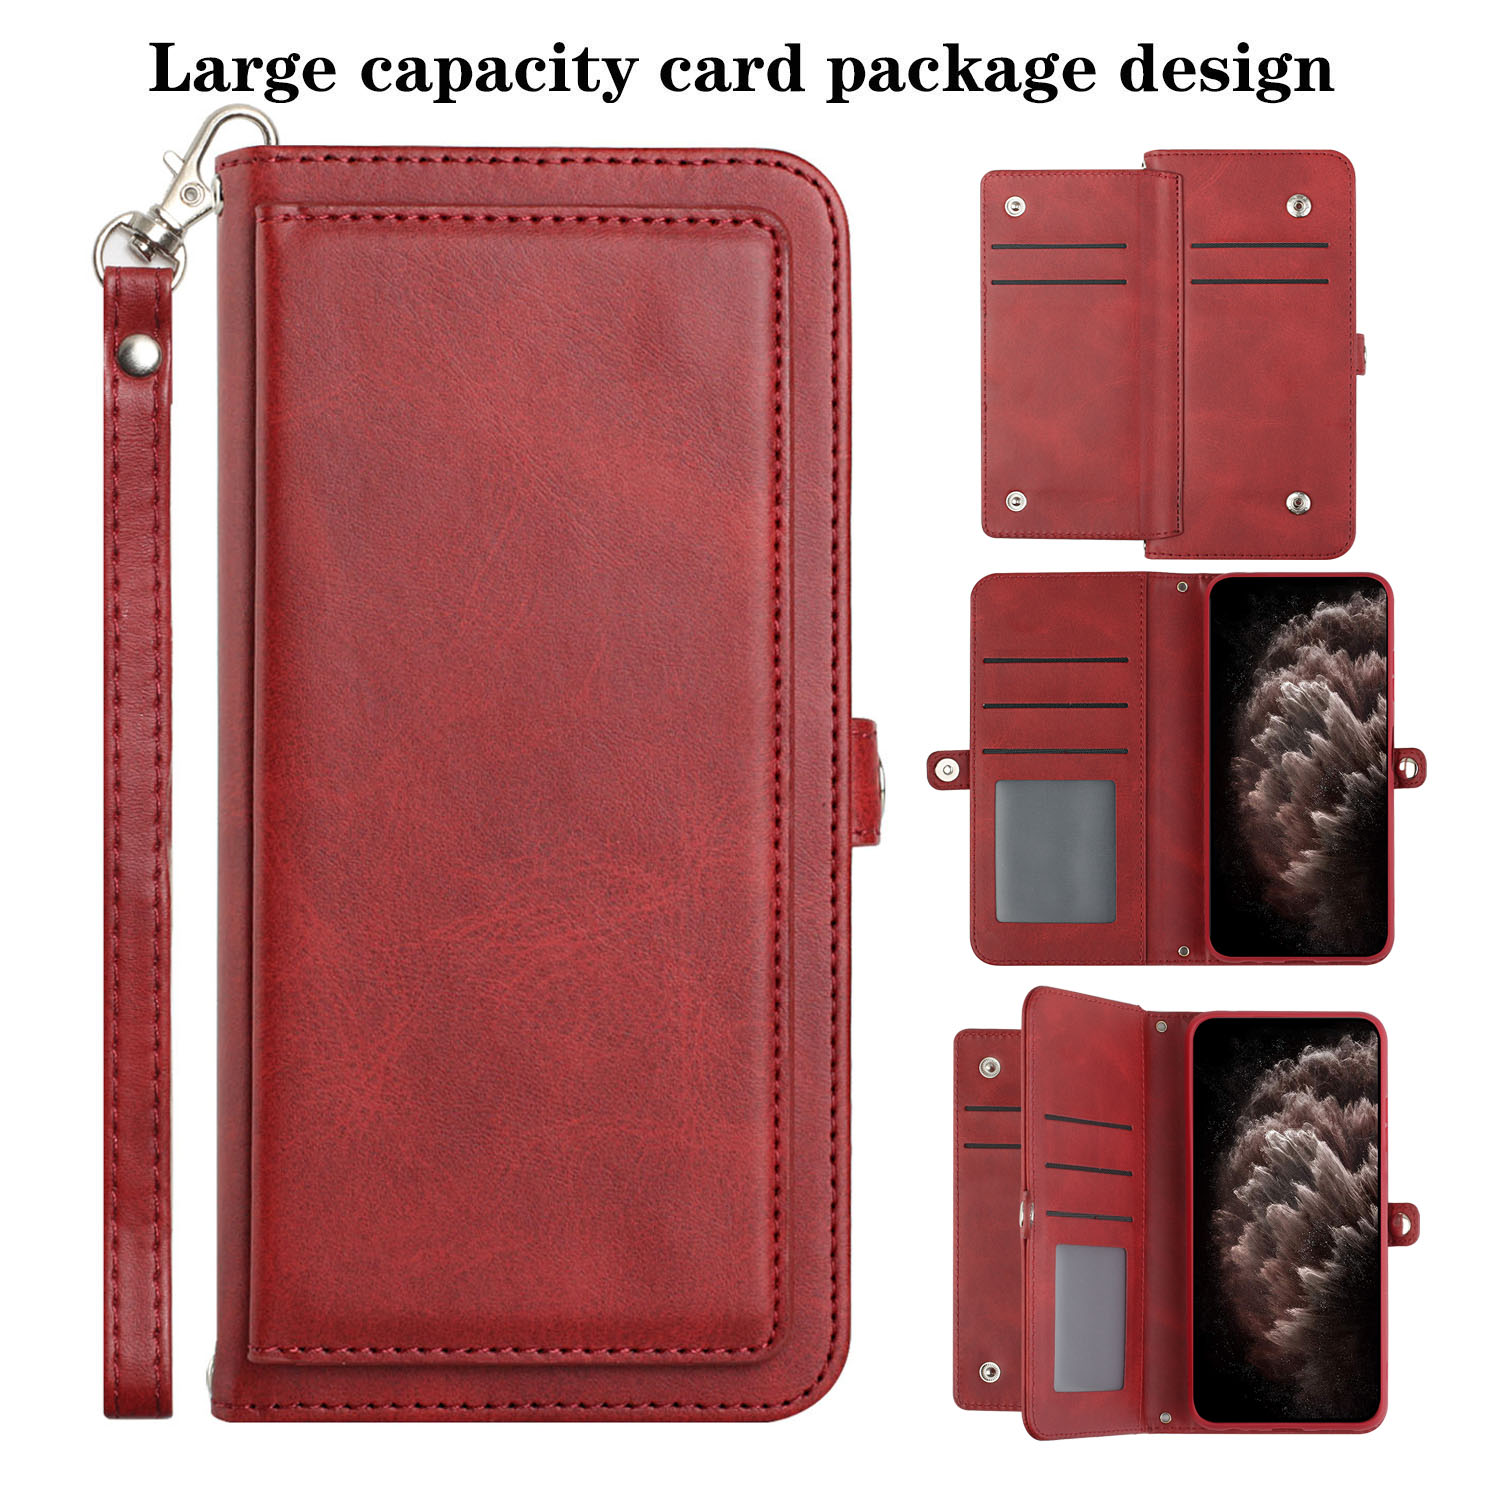 Premium PU Leather Folio WALLET Front Cover Case with Card Holder Slots and Wrist Strap for Apple